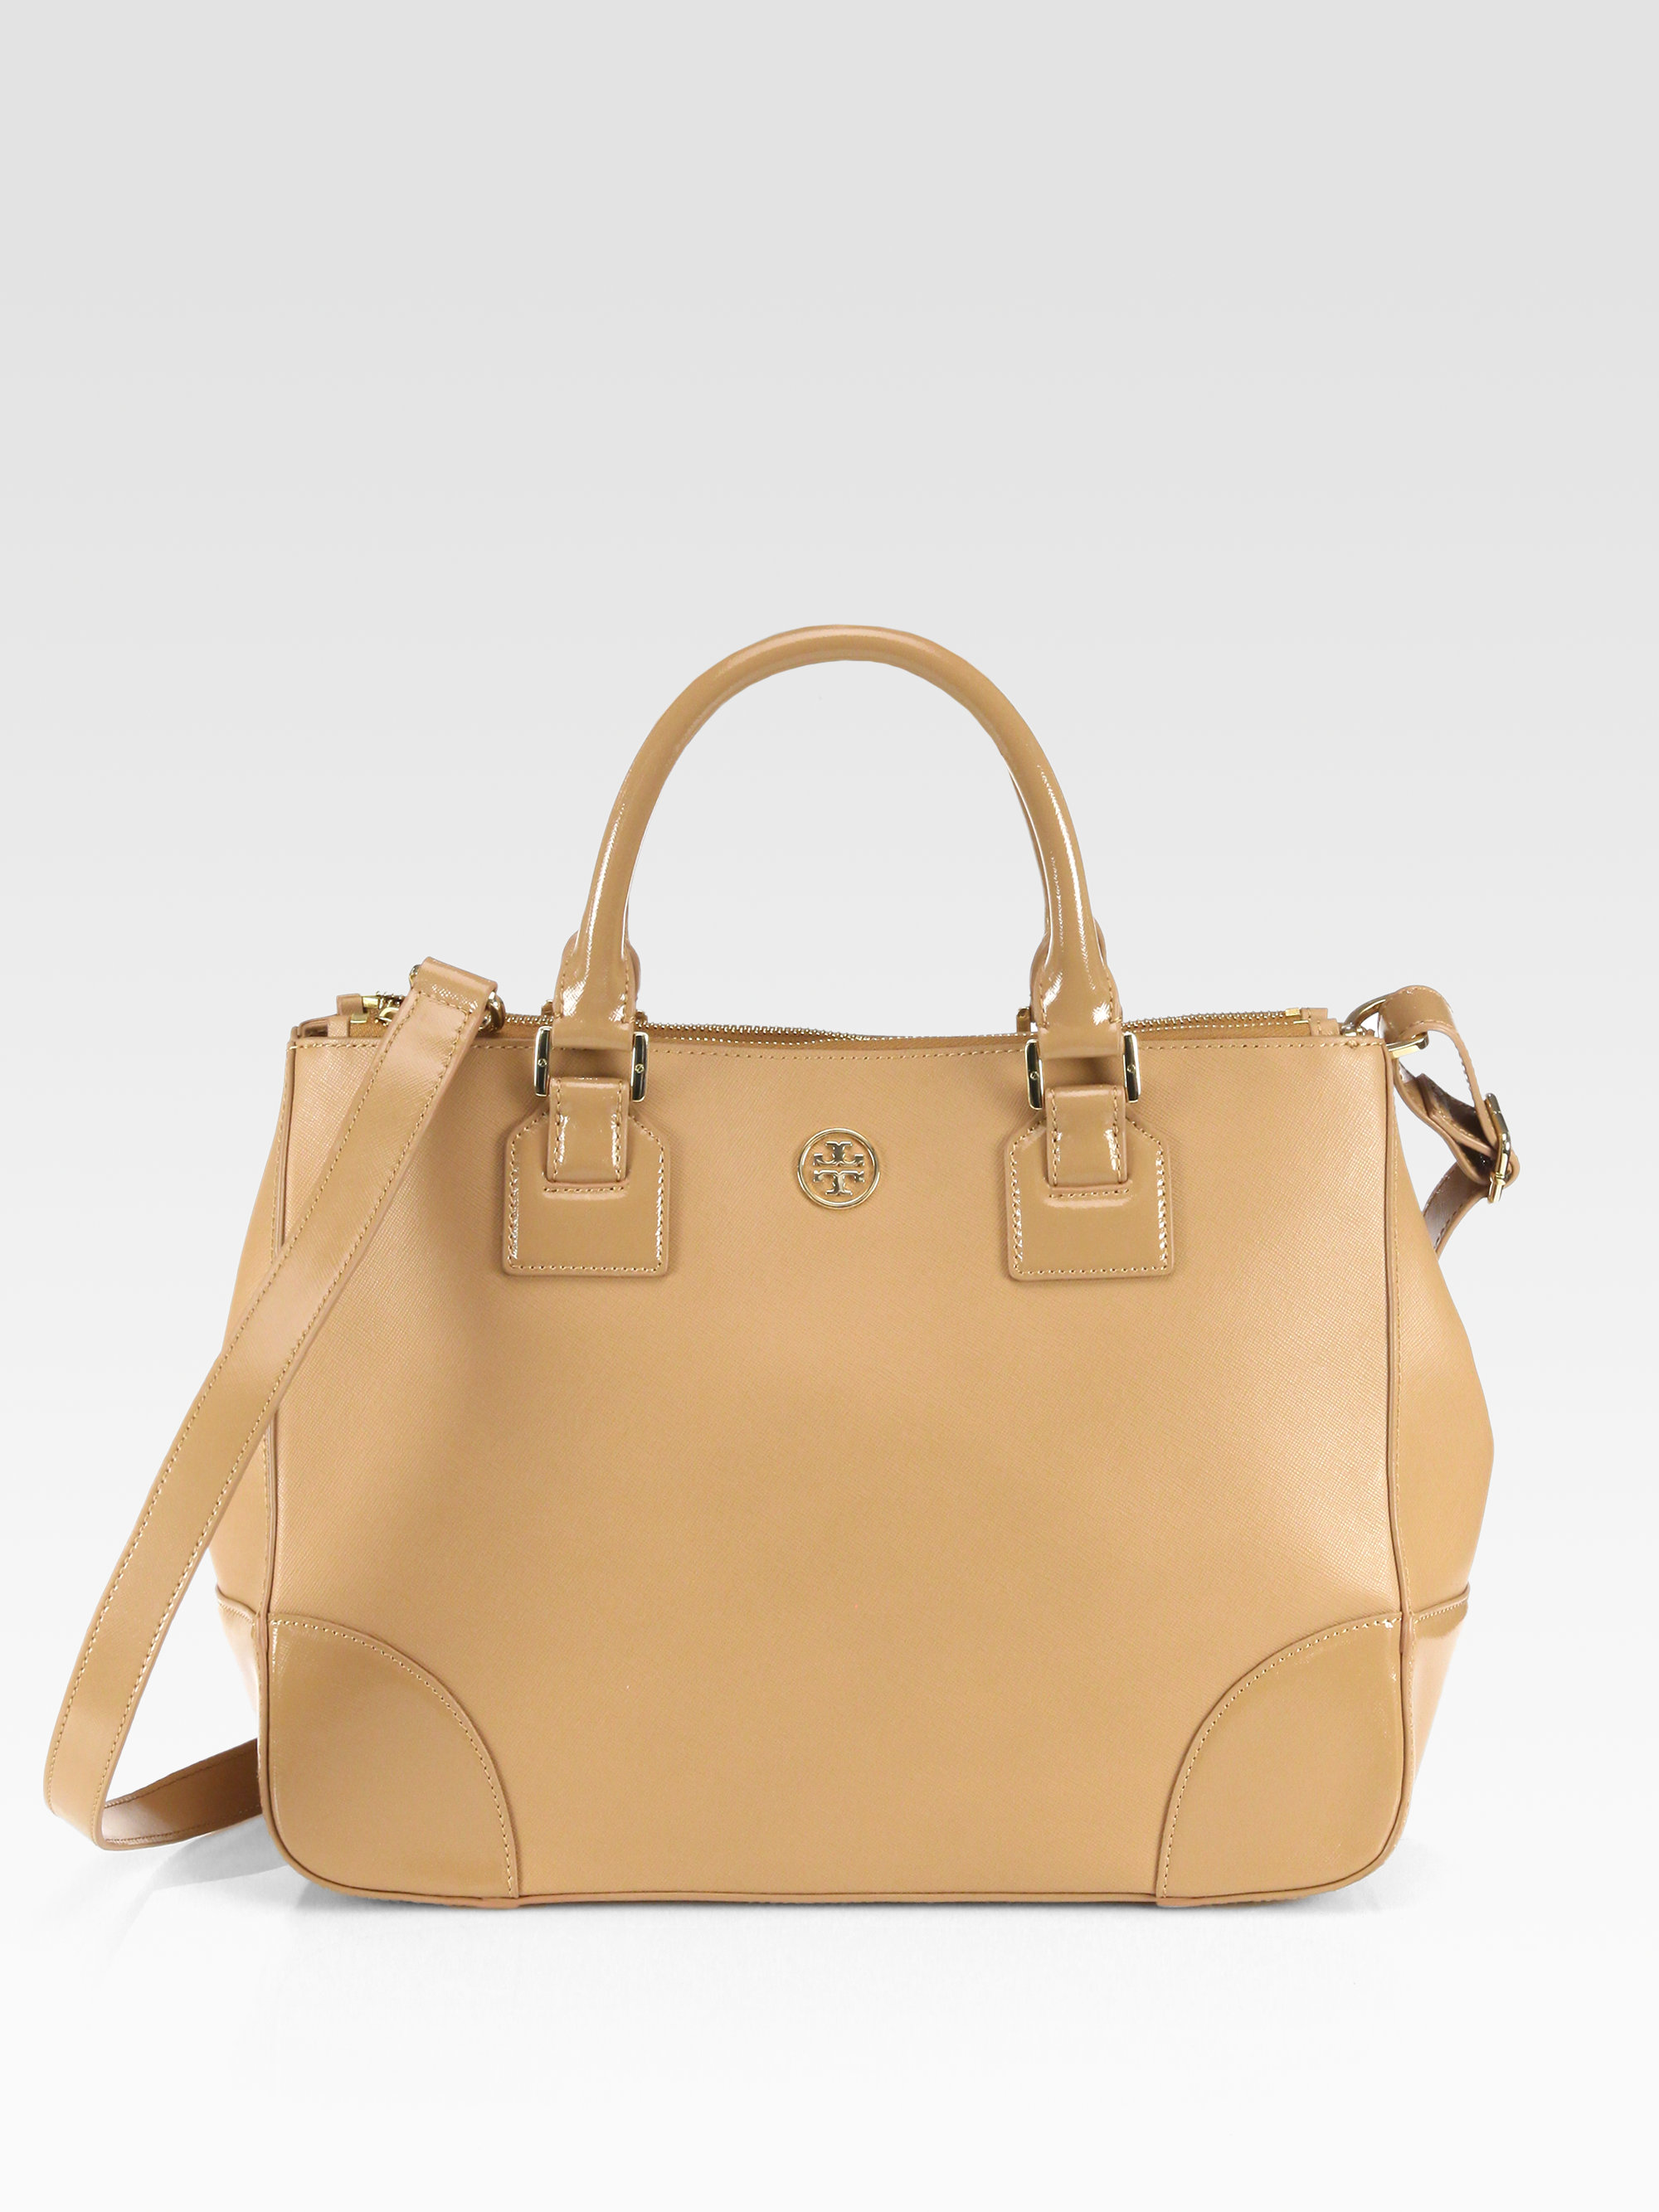 Tory burch Robinson Double Zip Tote in Brown | Lyst